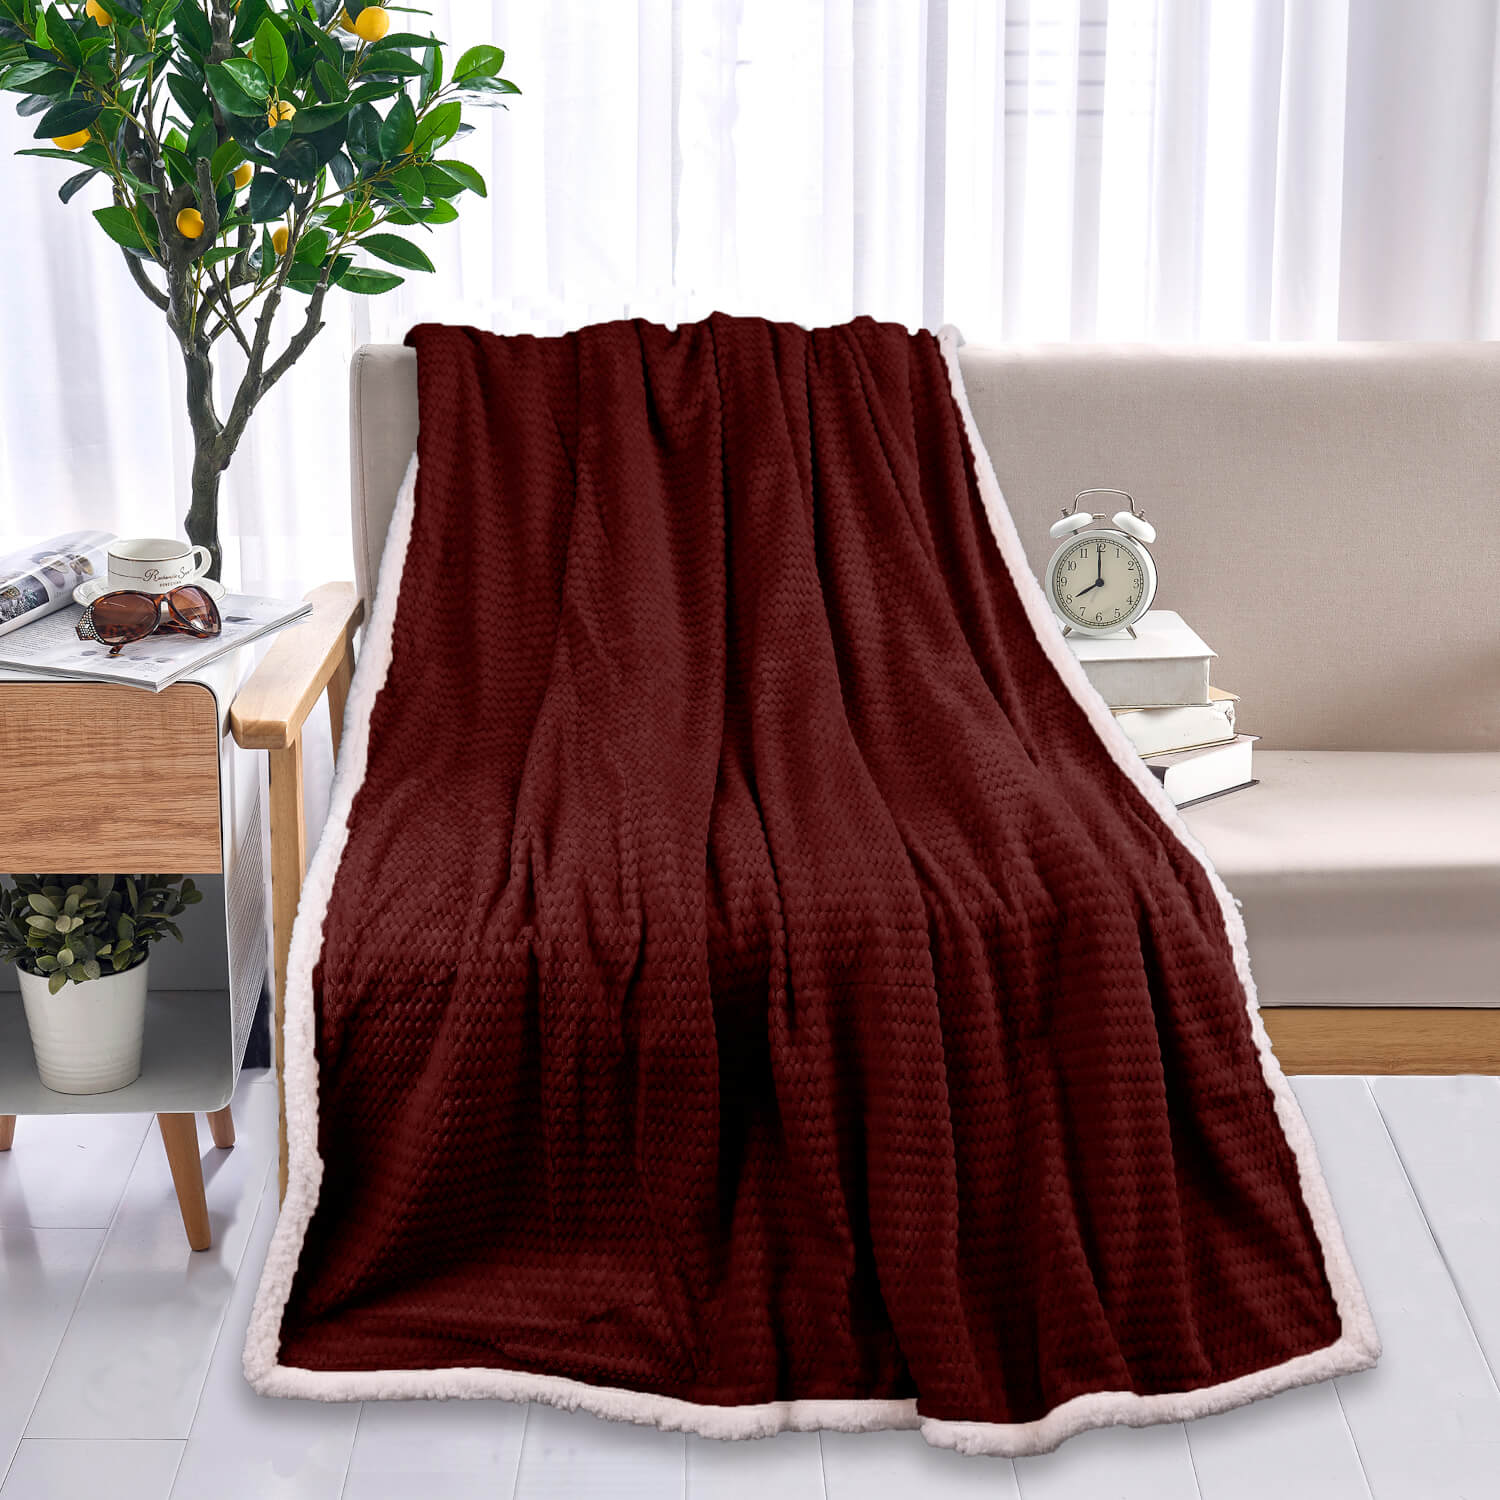 The Home Double Sided Throw 127cm x 152cm - Red 1 Shaws Department Stores